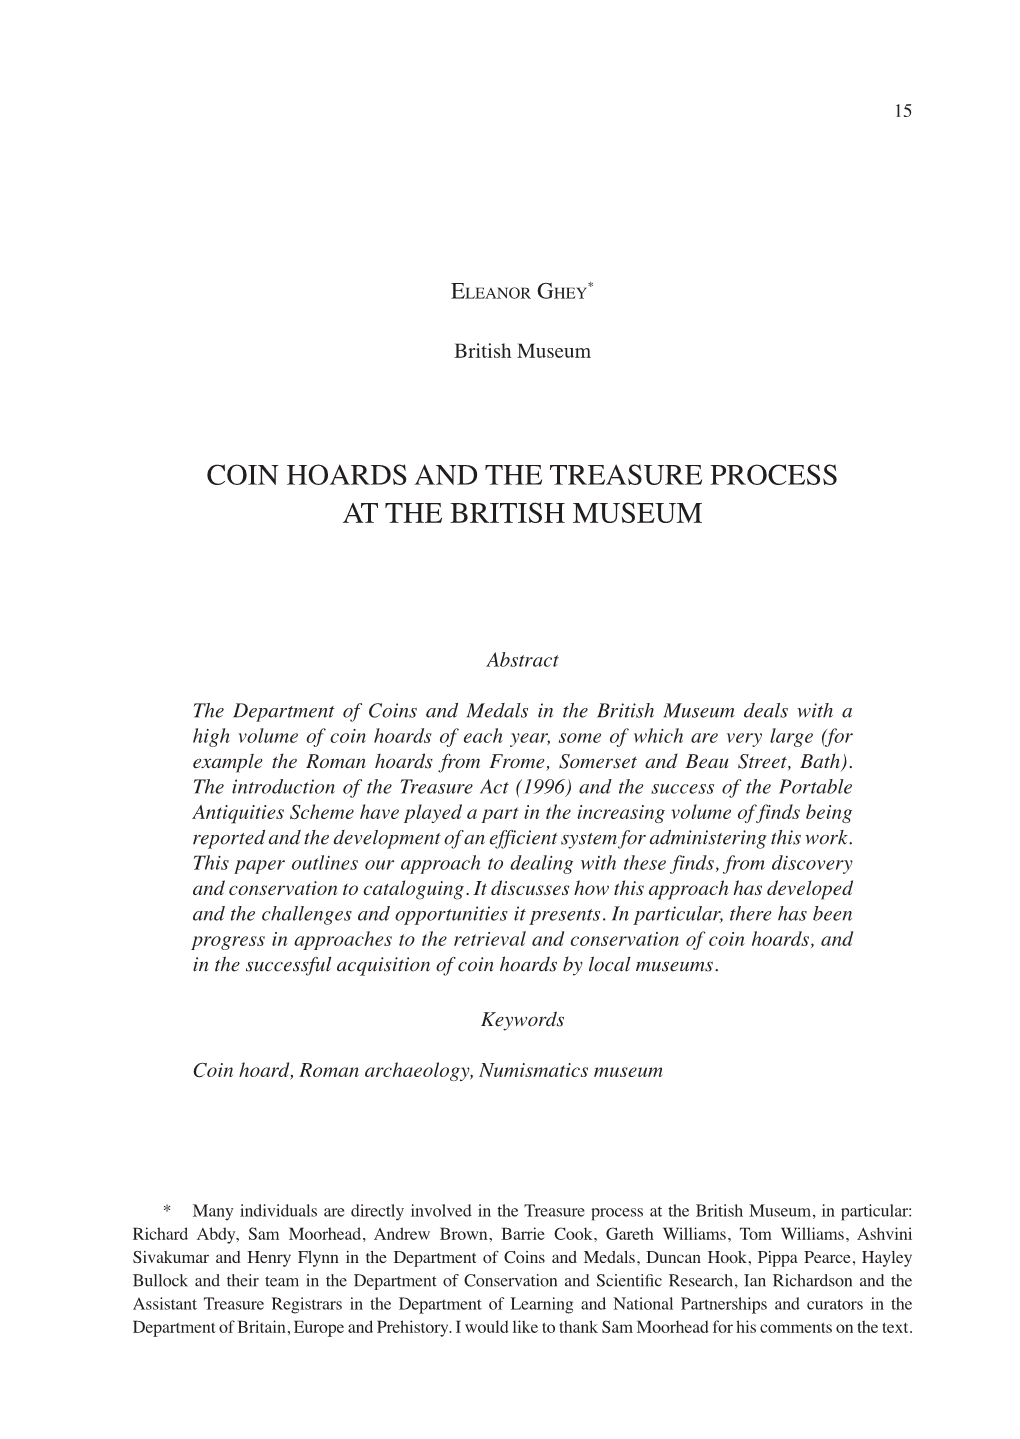 Coin Hoards and the Treasure Process at the British Museum